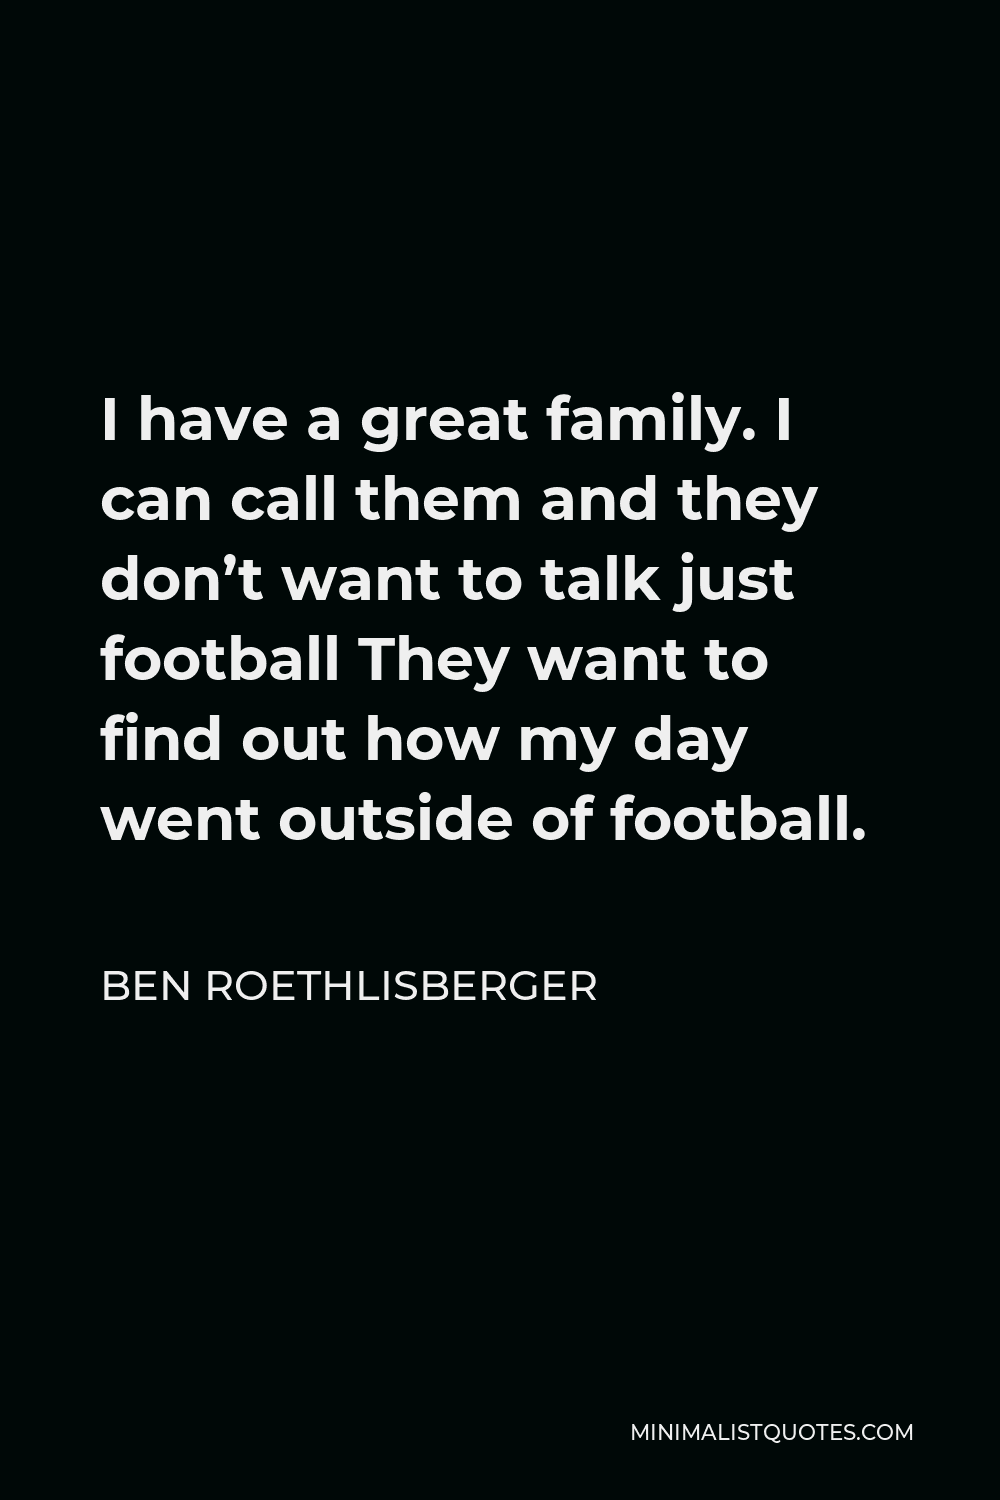 Ben Roethlisberger Quote - I have a great family. I can call them and they don’t want to talk just football They want to find out how my day went outside of football.